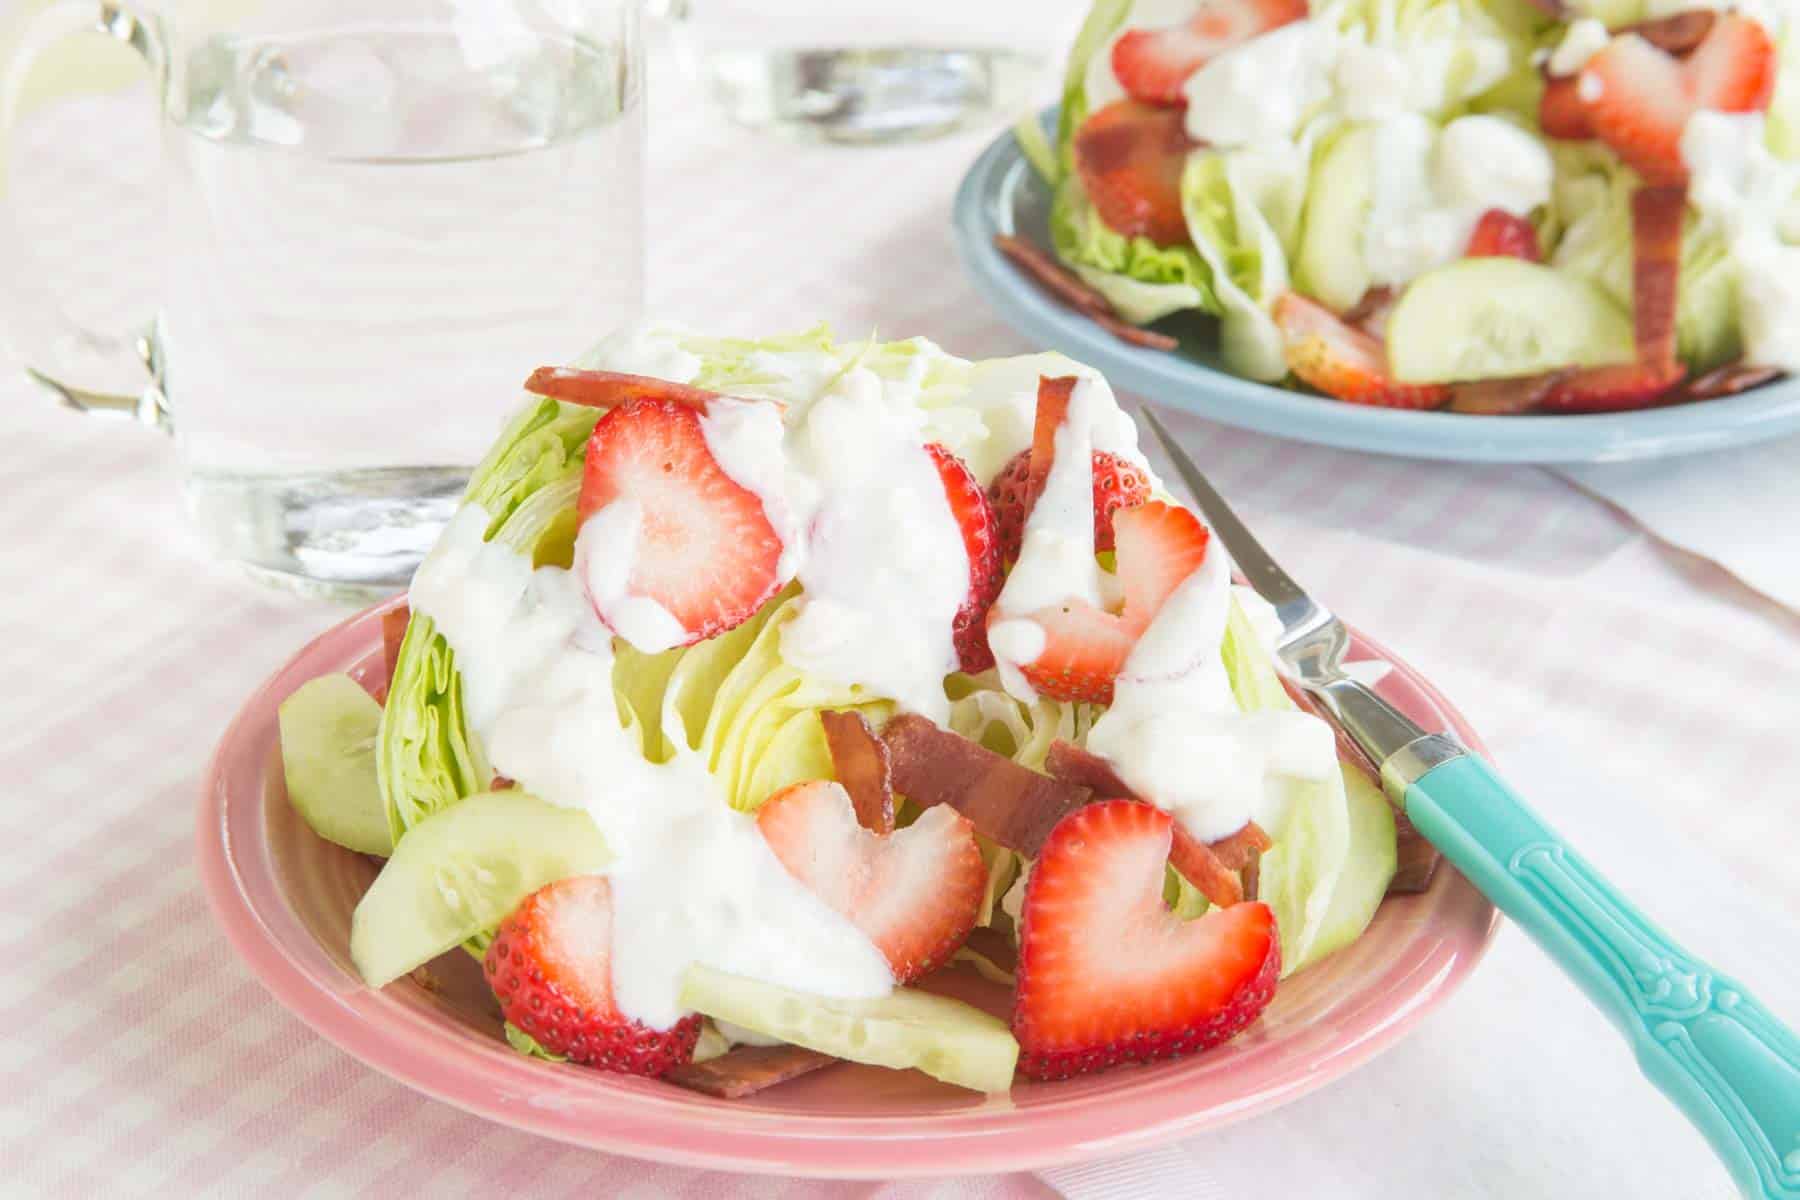 A wedge salad with strawberries on a pink plate with another on a blue plate in the background.